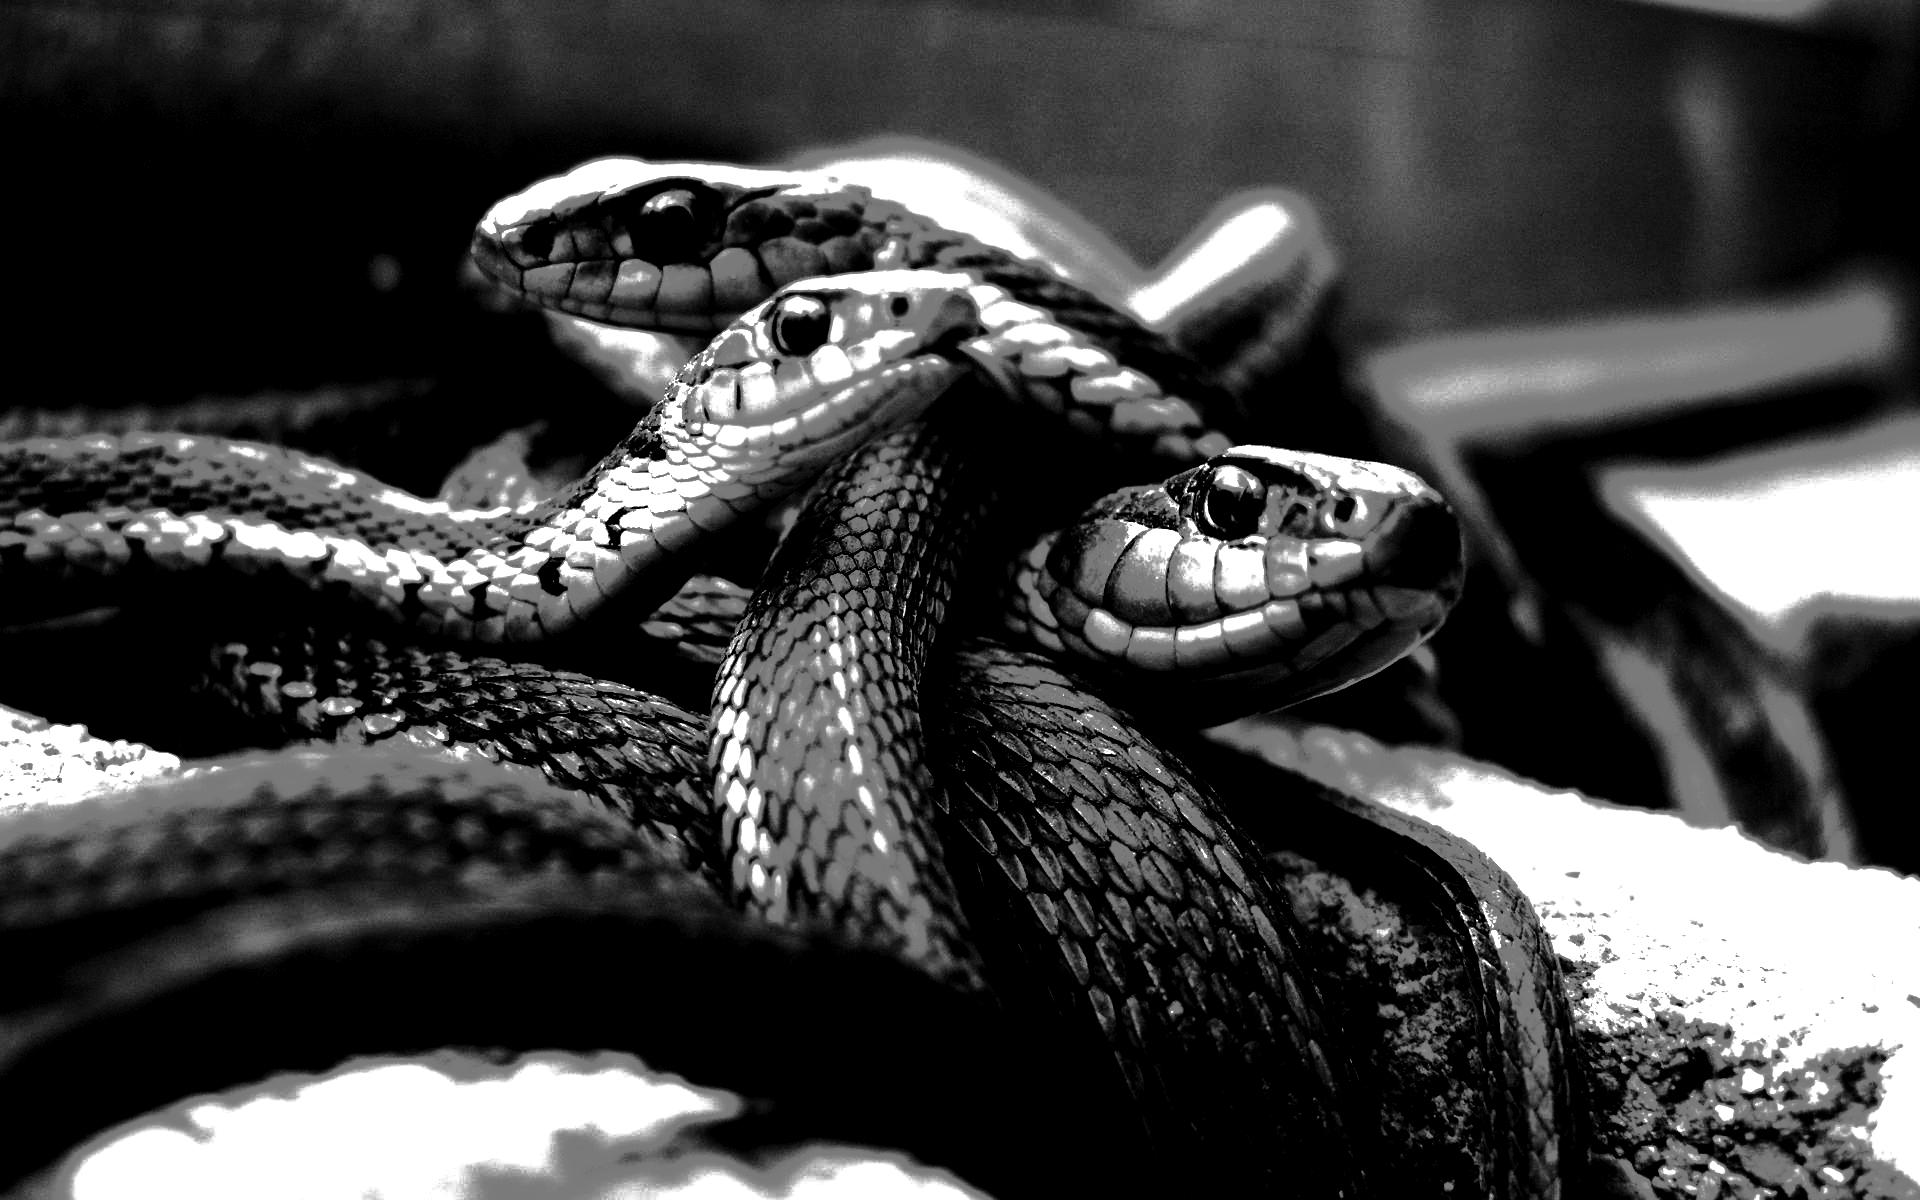 Free Download Viper Snake Image And White Picture Of